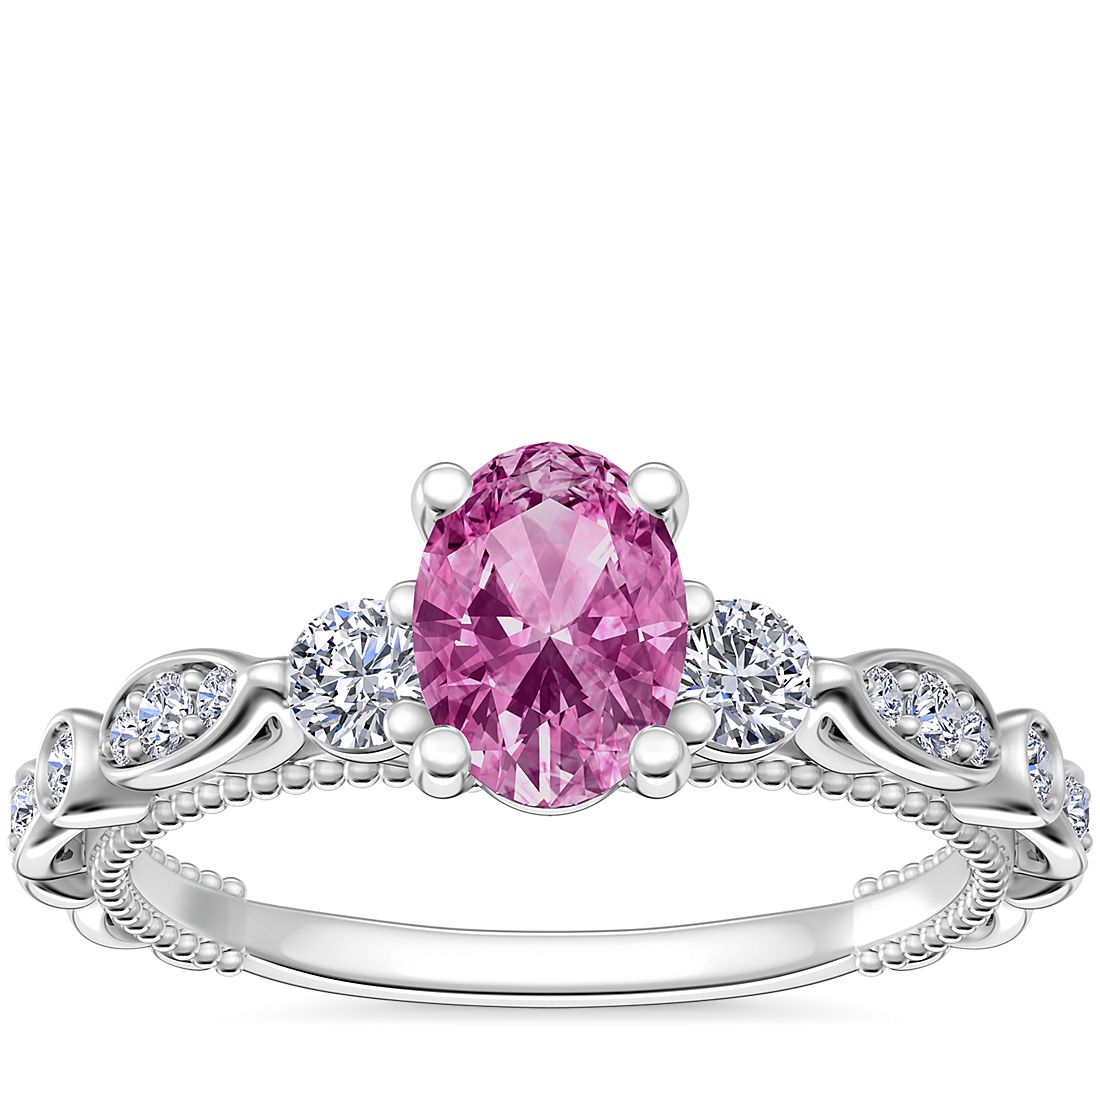 Floral Ellipse Diamond Cathedral Engagement Ring with Oval Pink Sapphire in Platinum (7x5mm)